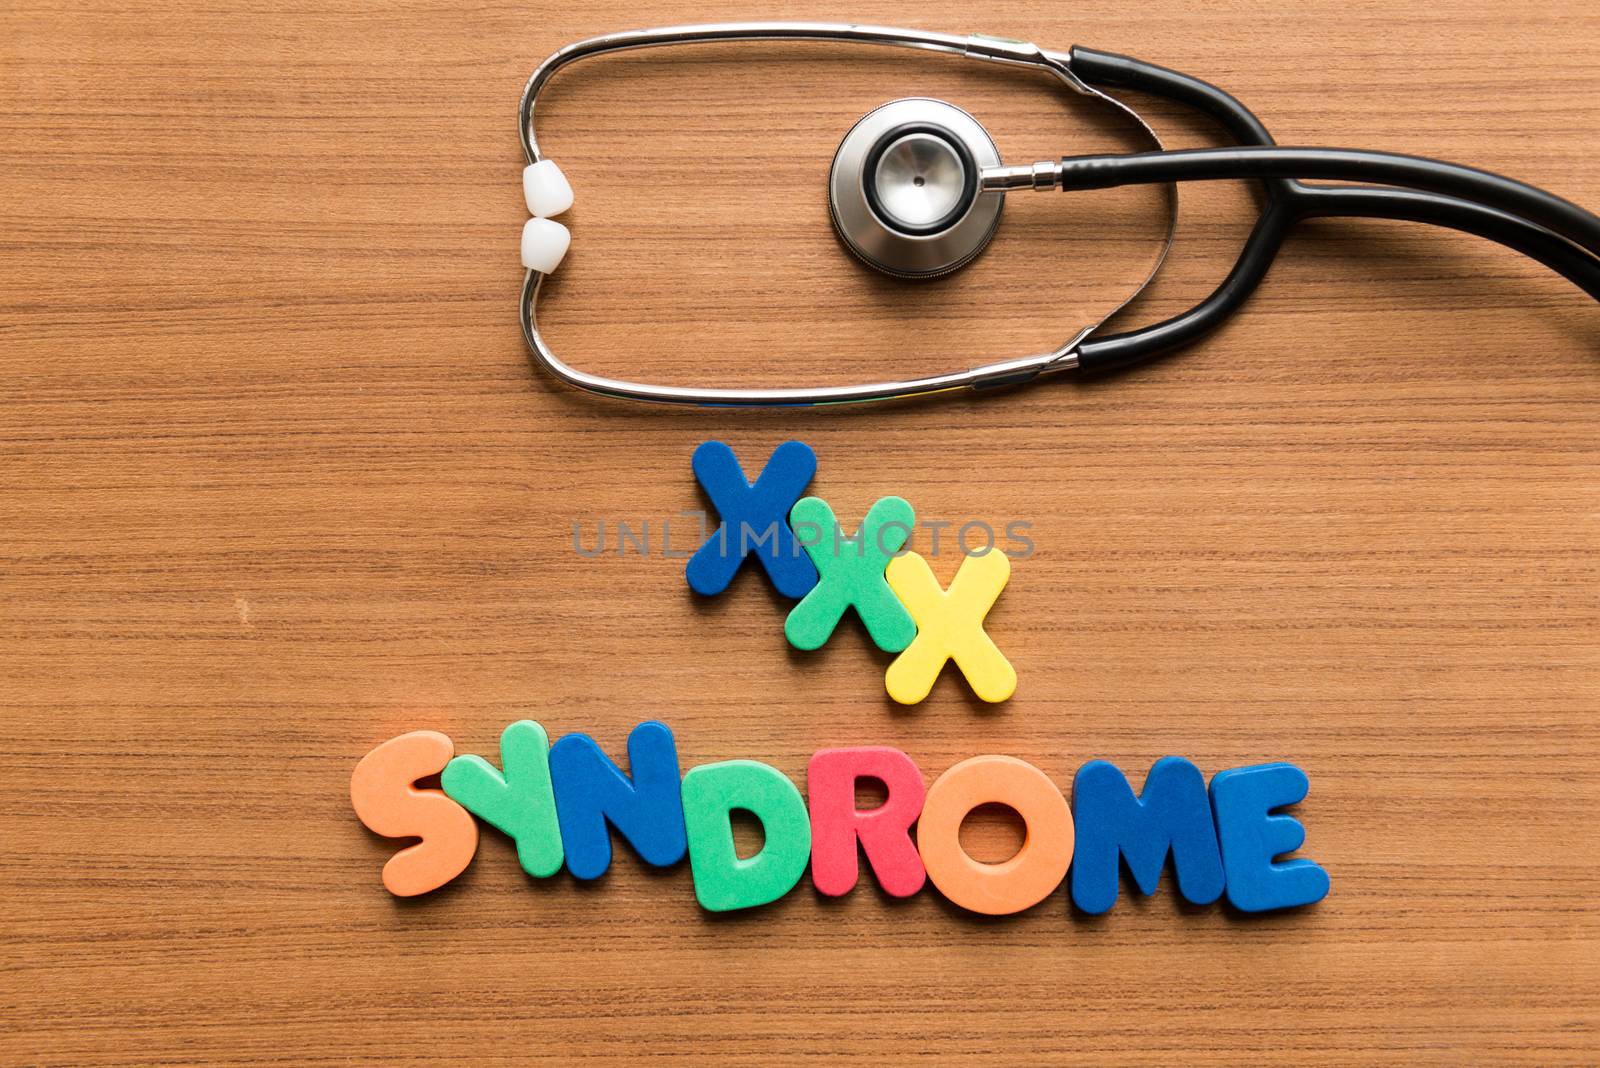 xxx syndrome colorful word with stethoscope by sohel.parvez@hotmail.com